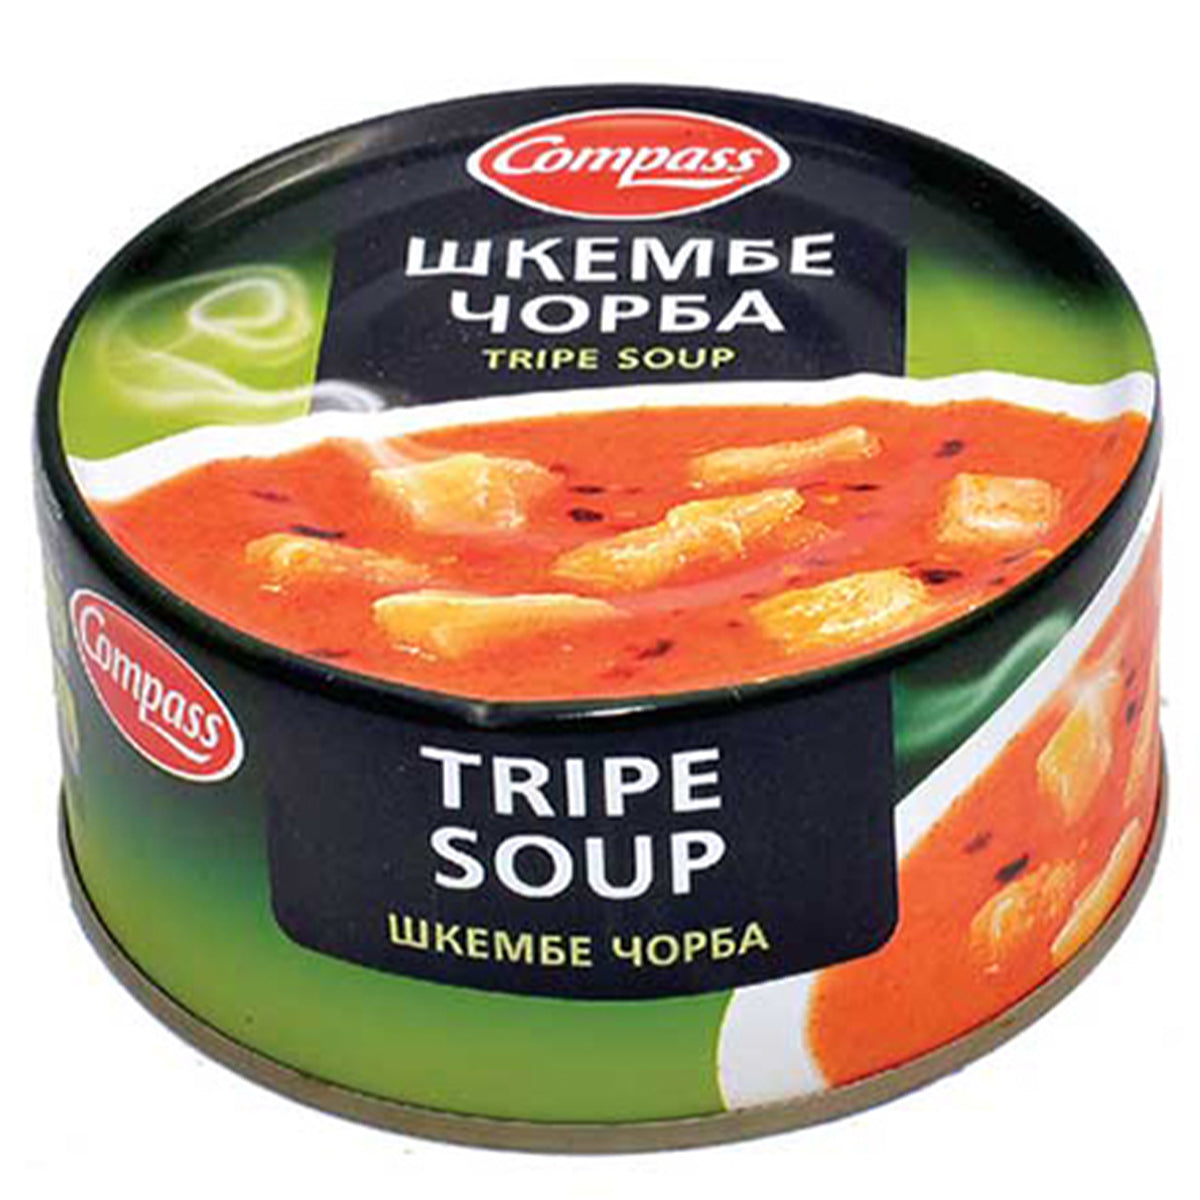 A tin of Compass - Tripe Soup - 300g in a white background.